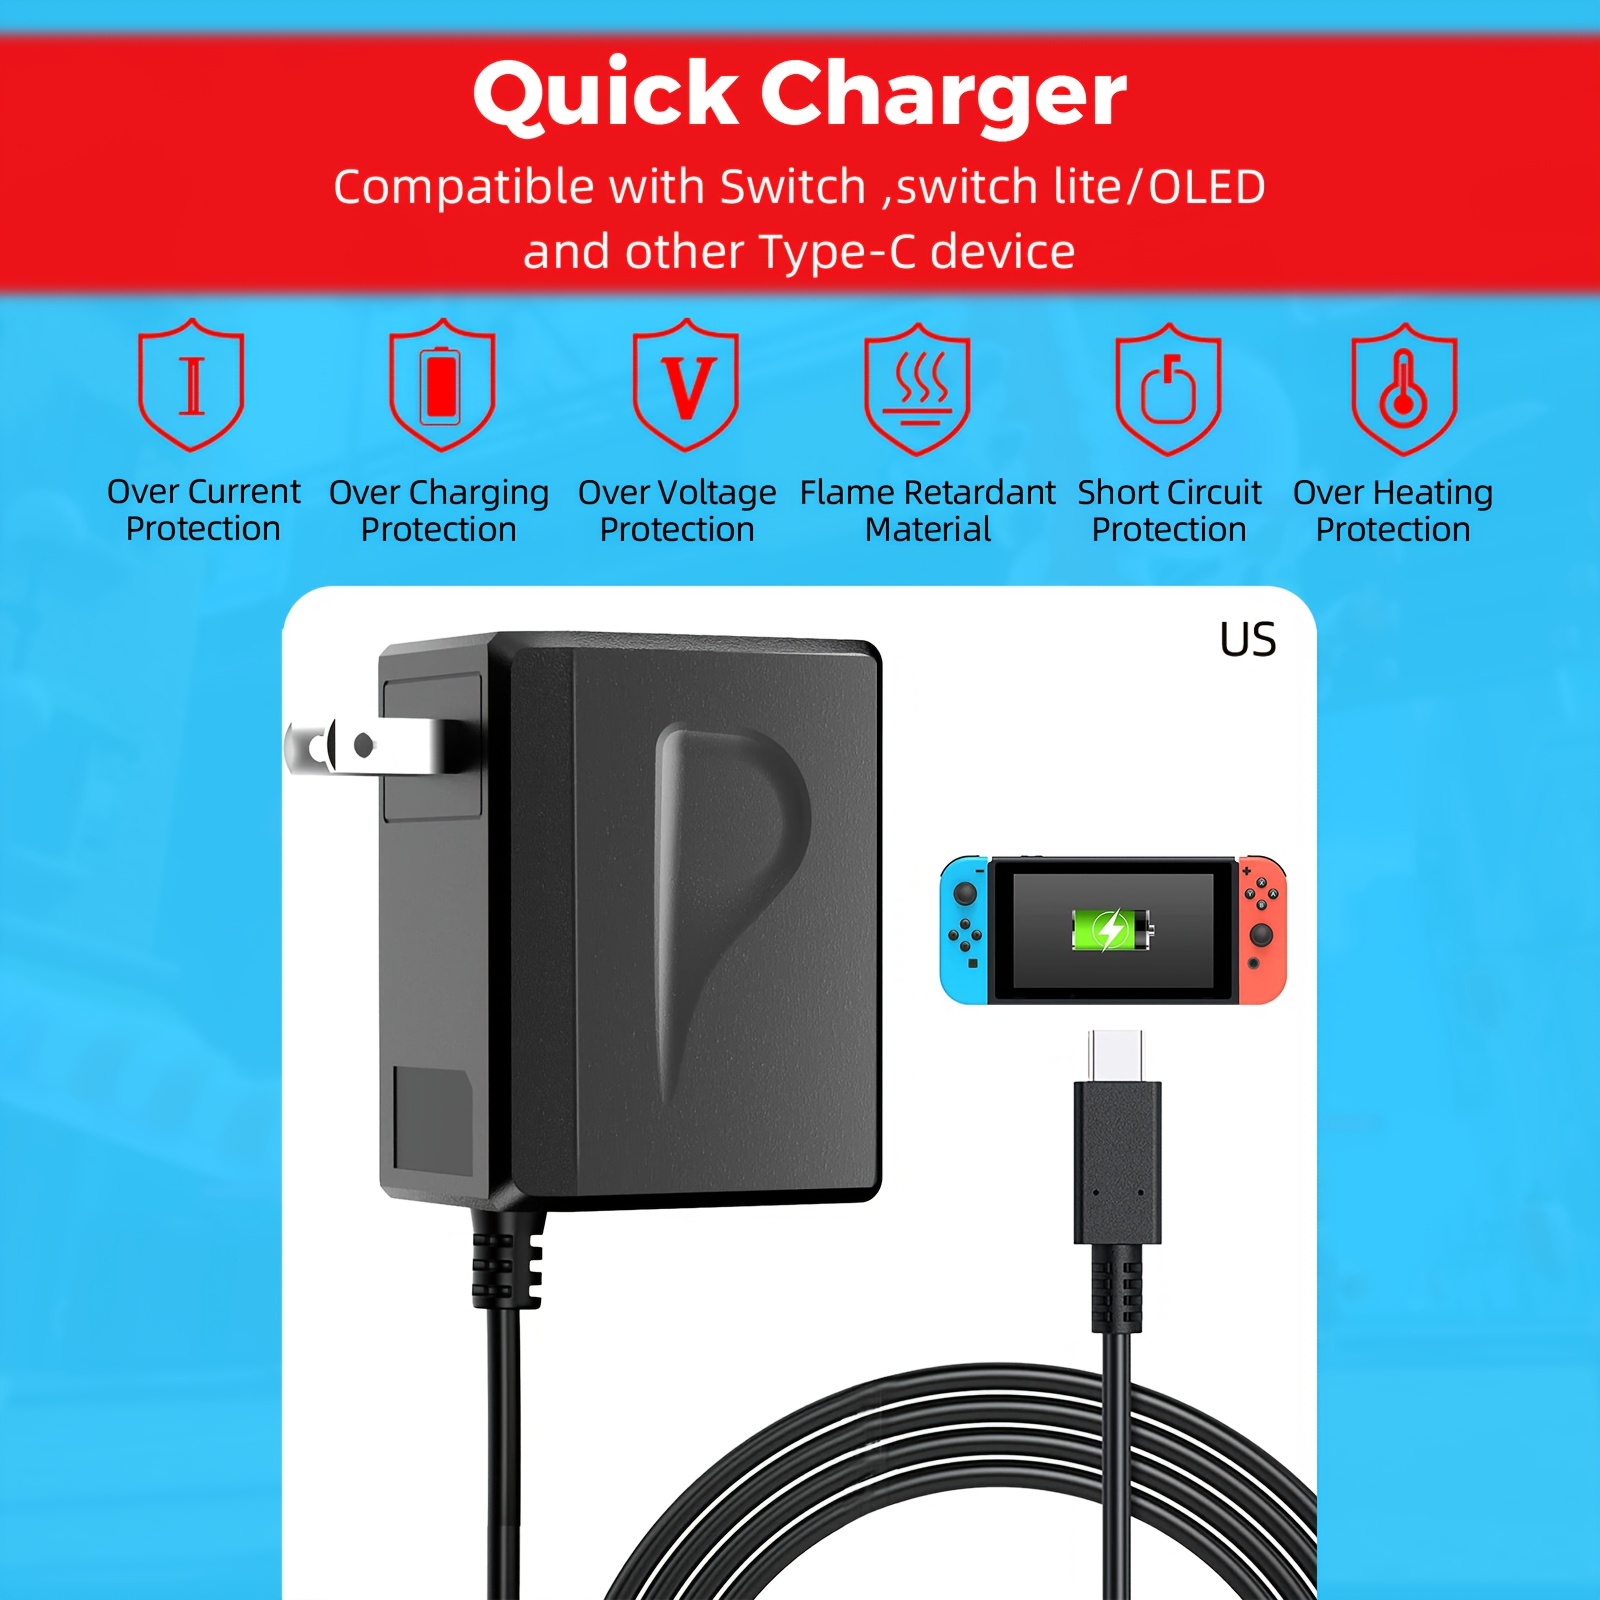 Charger Cable for Nintendo Switch / Lite / Docking Charging Station 4K HDMI  TV